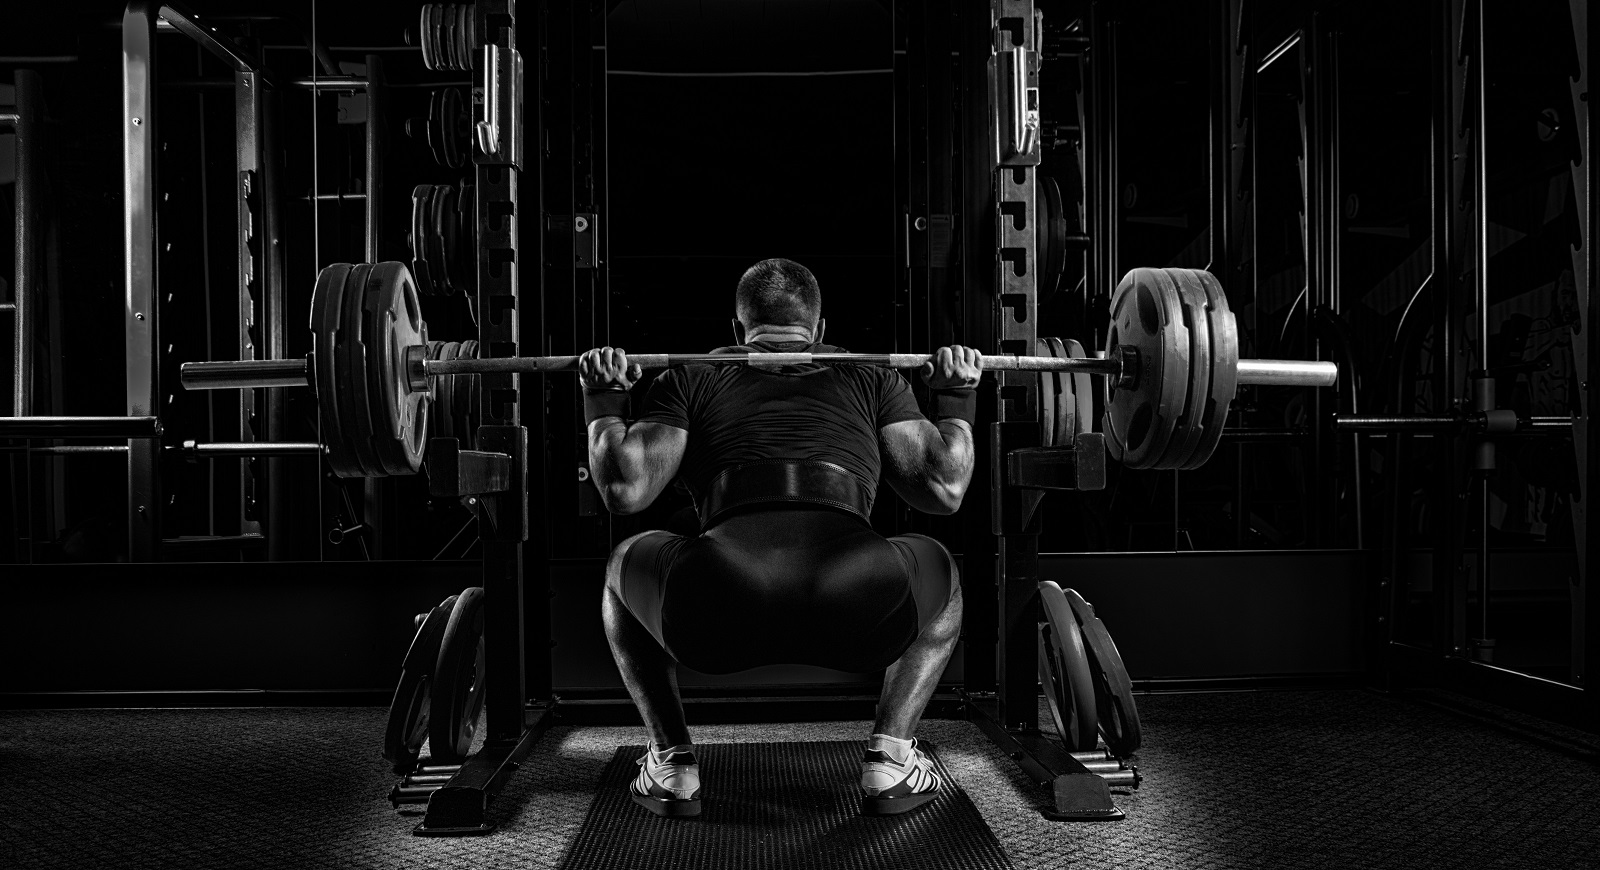 Man weightlifting - squat, deadlift, bench press. Push, pull, legs - the best fitness program for beginners who want to increase muscle mass